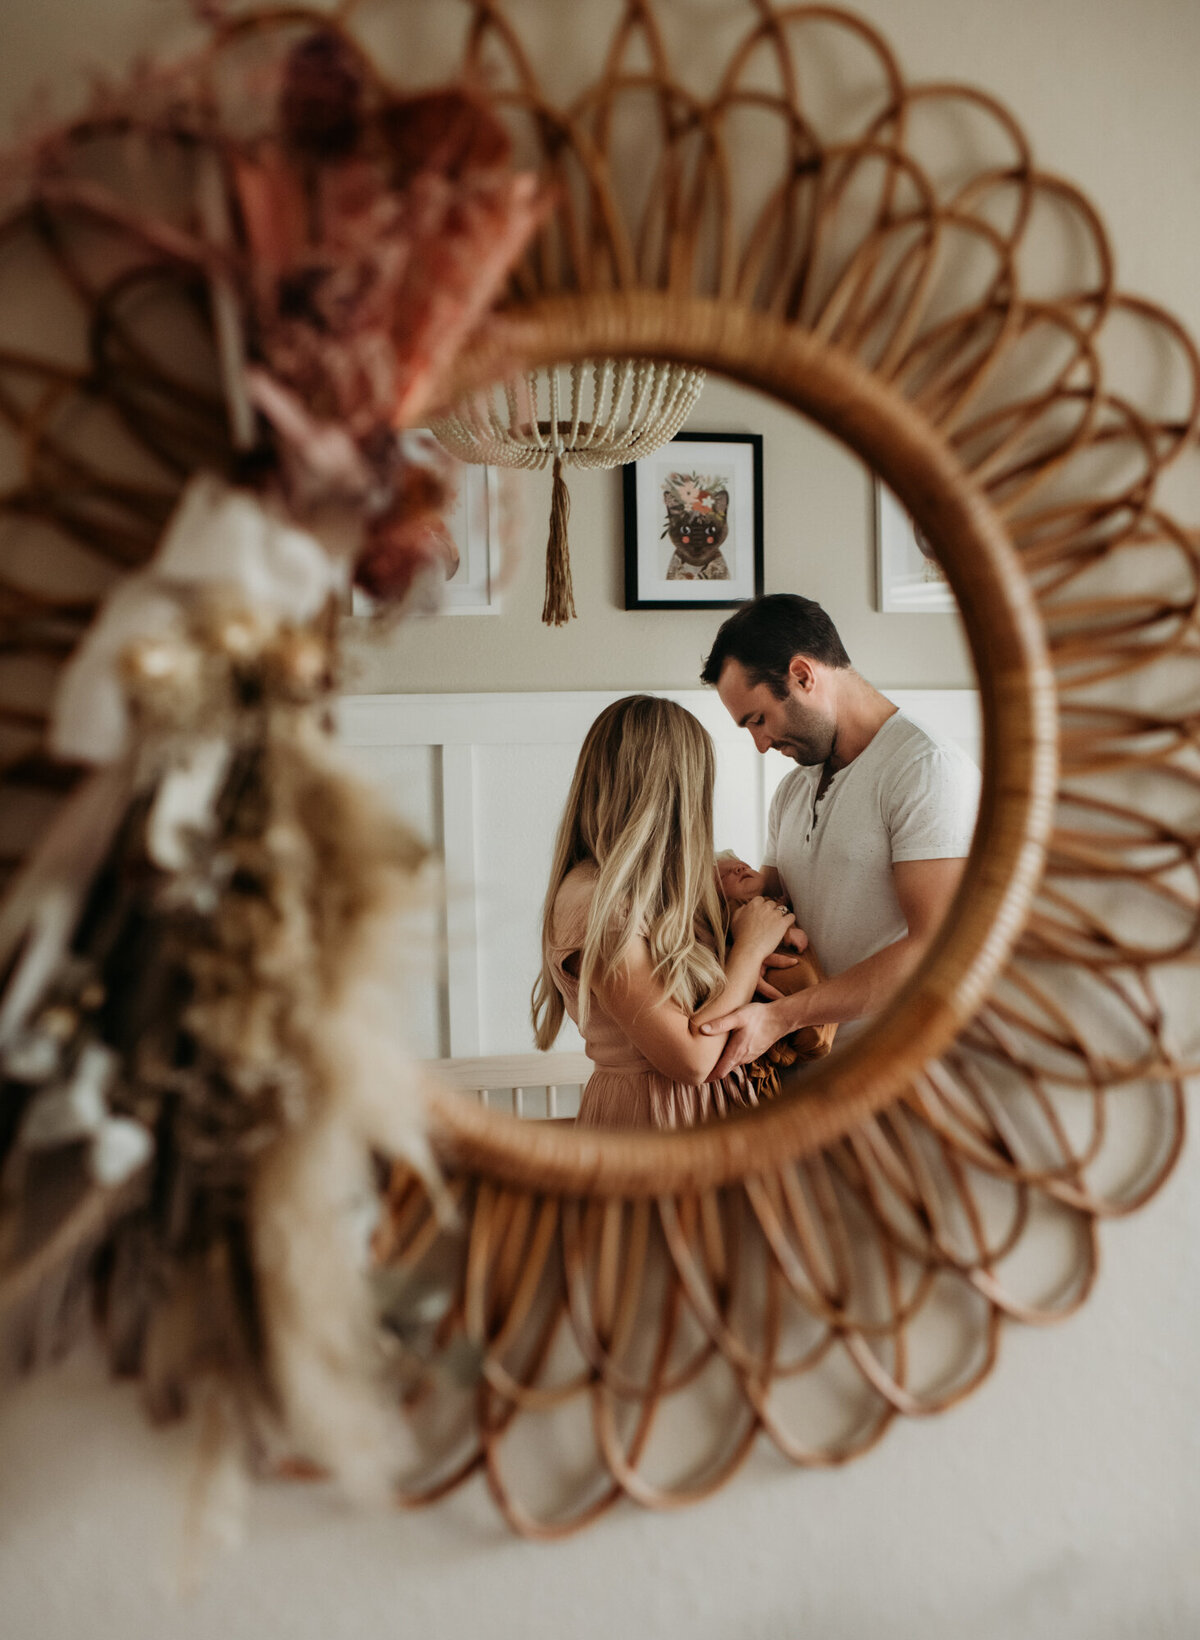 Newborn Photographer, Mom and dad snuggling their new baby in the mirror.